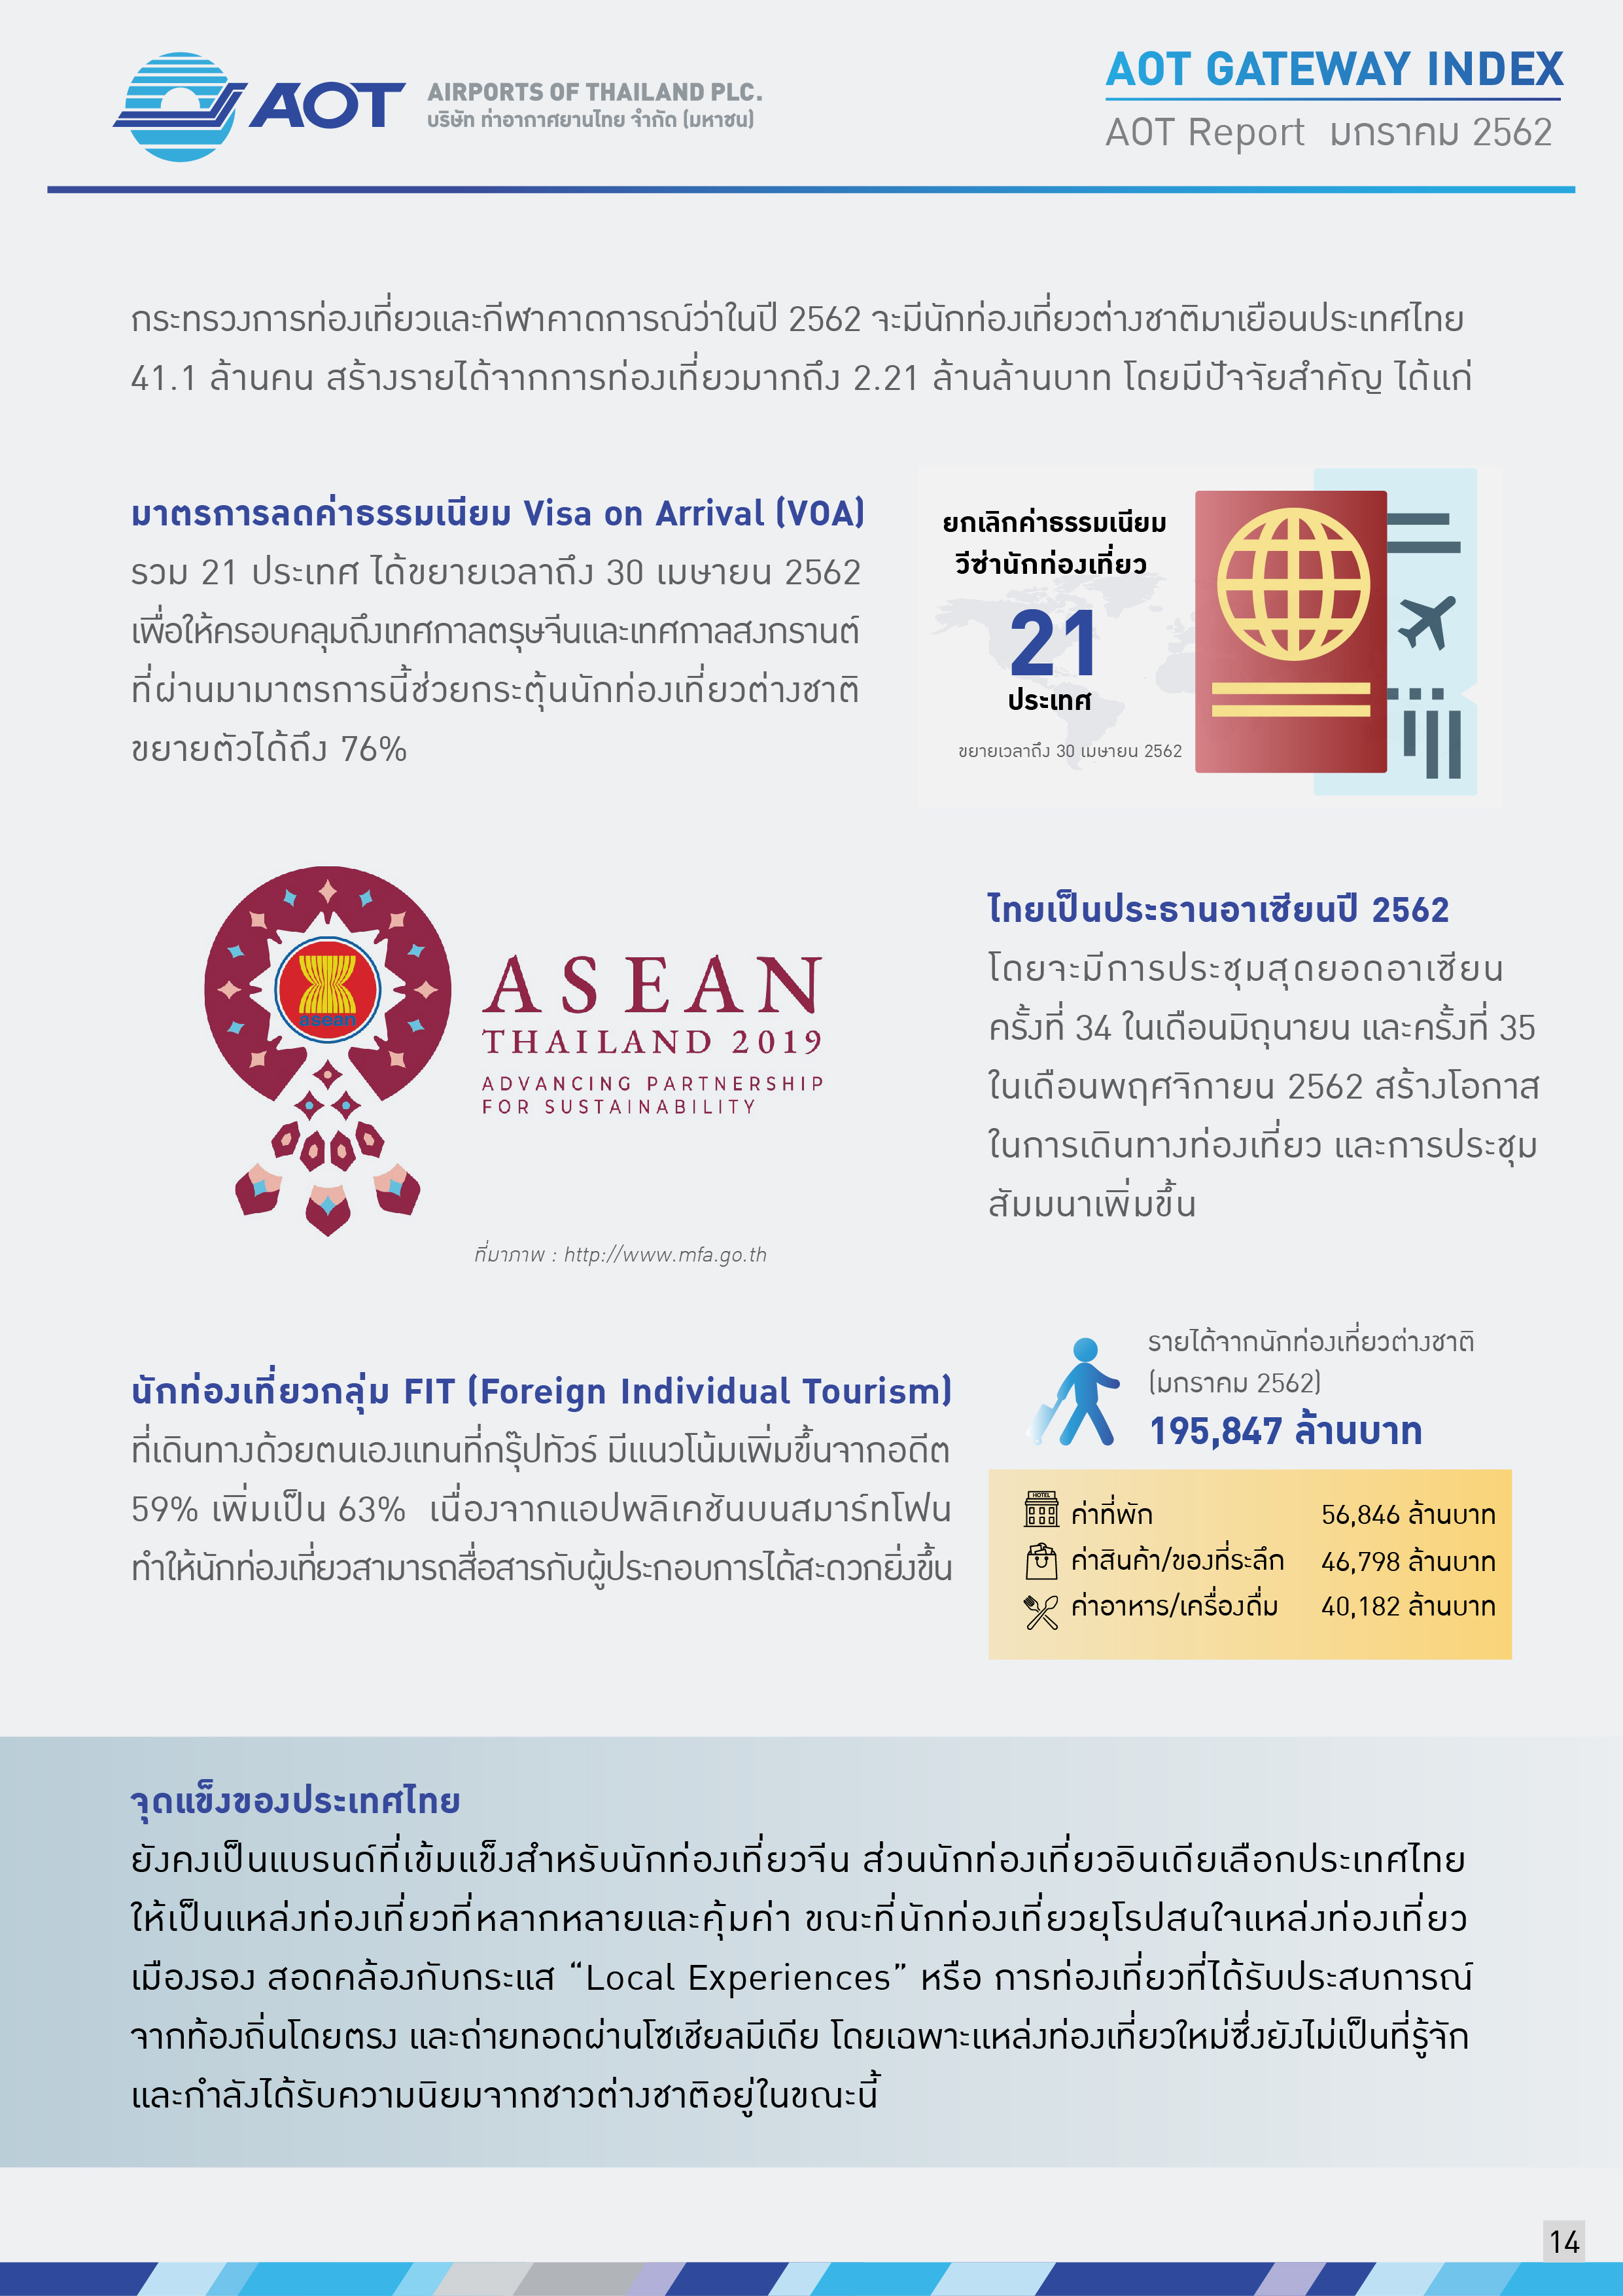 AOTcontent2019_Index_02_เศรษฐกิจโลก_V5_20190401_Page14